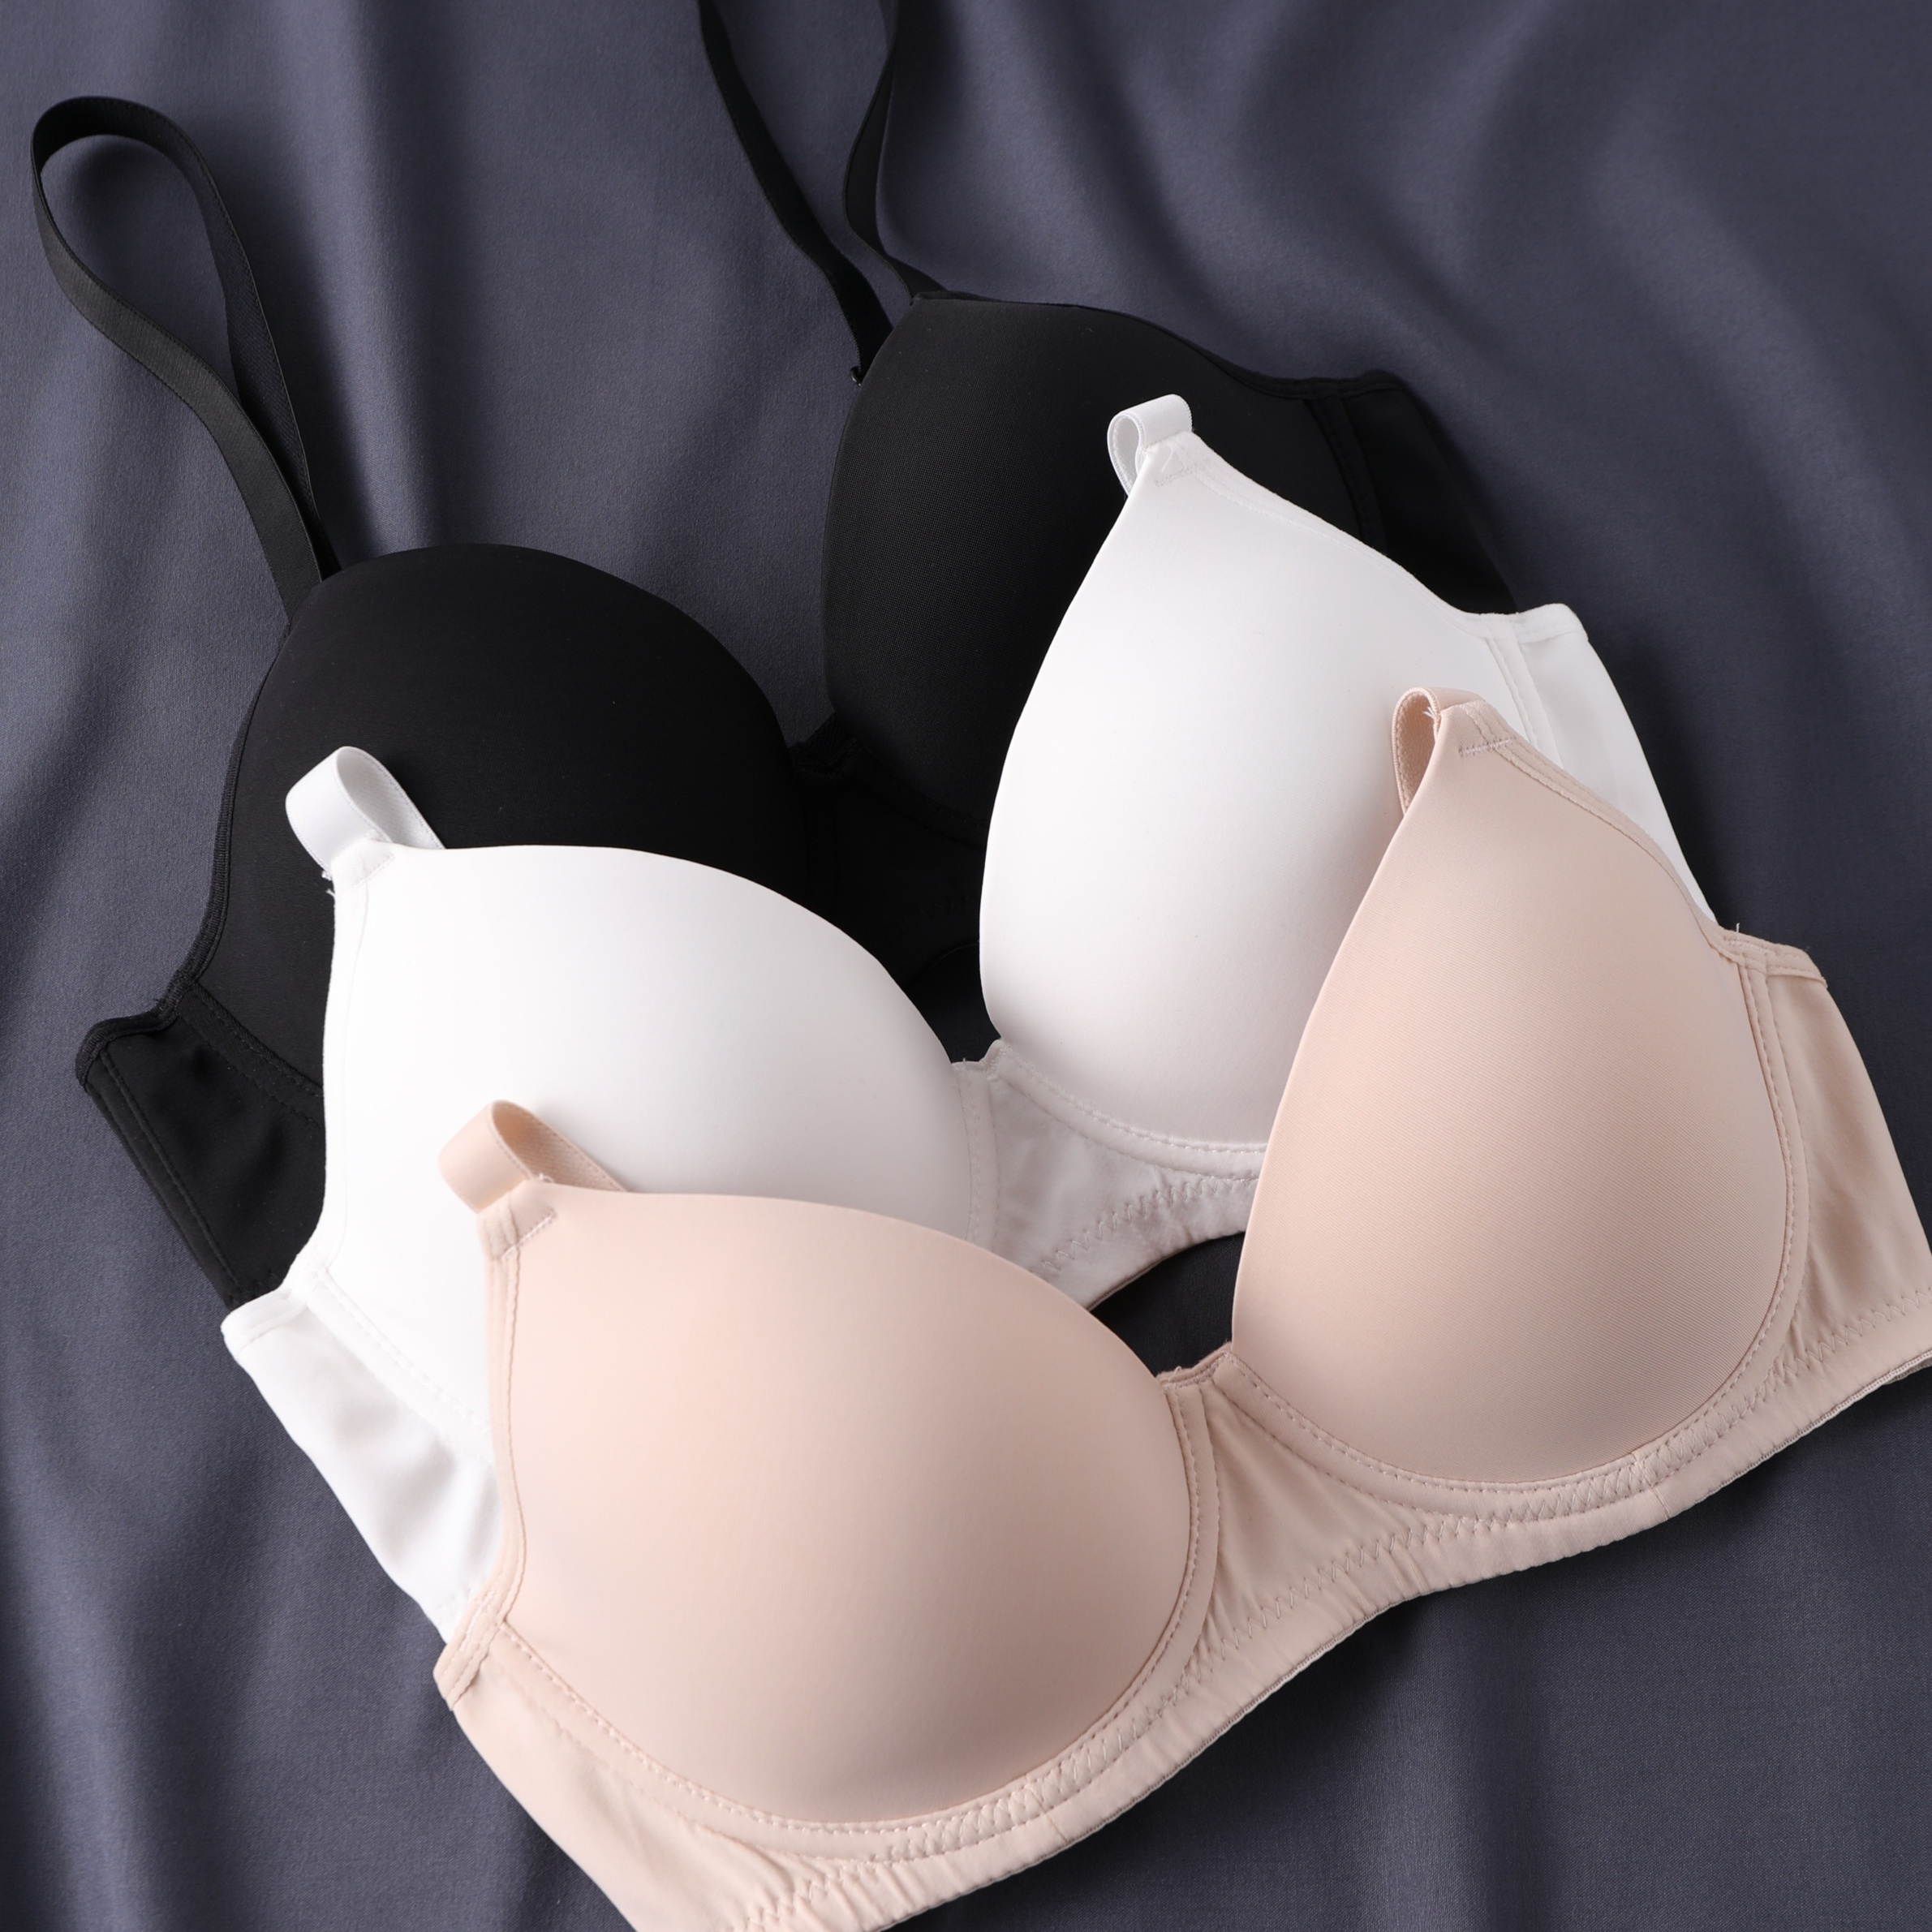 

3pcs Simple Solid Seamless Underwire Bra, Comfy & Breathable Push Up Bra, Women's Lingerie & Underwear